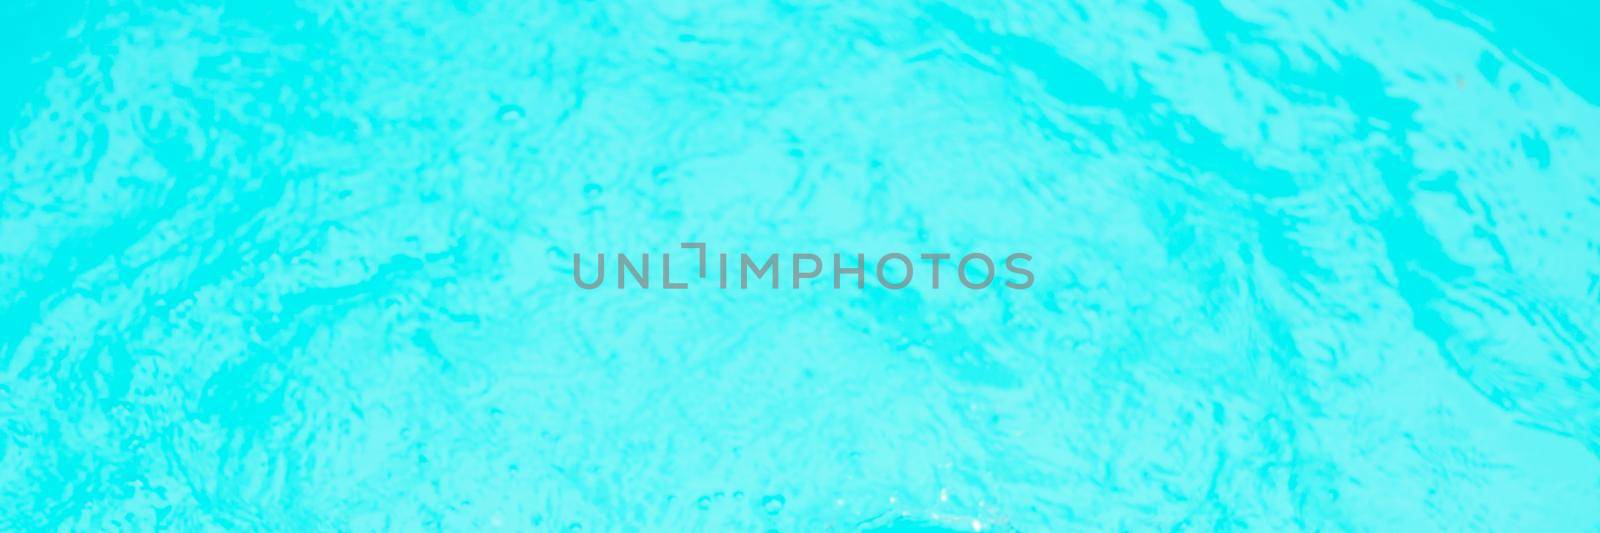 BANNER Abstract real nature water surface texture copy space soft abstract background as sky or fabric. Turquoise Light bright blue colour. Design Simplicity Minimalism Infinity Romantic mood.